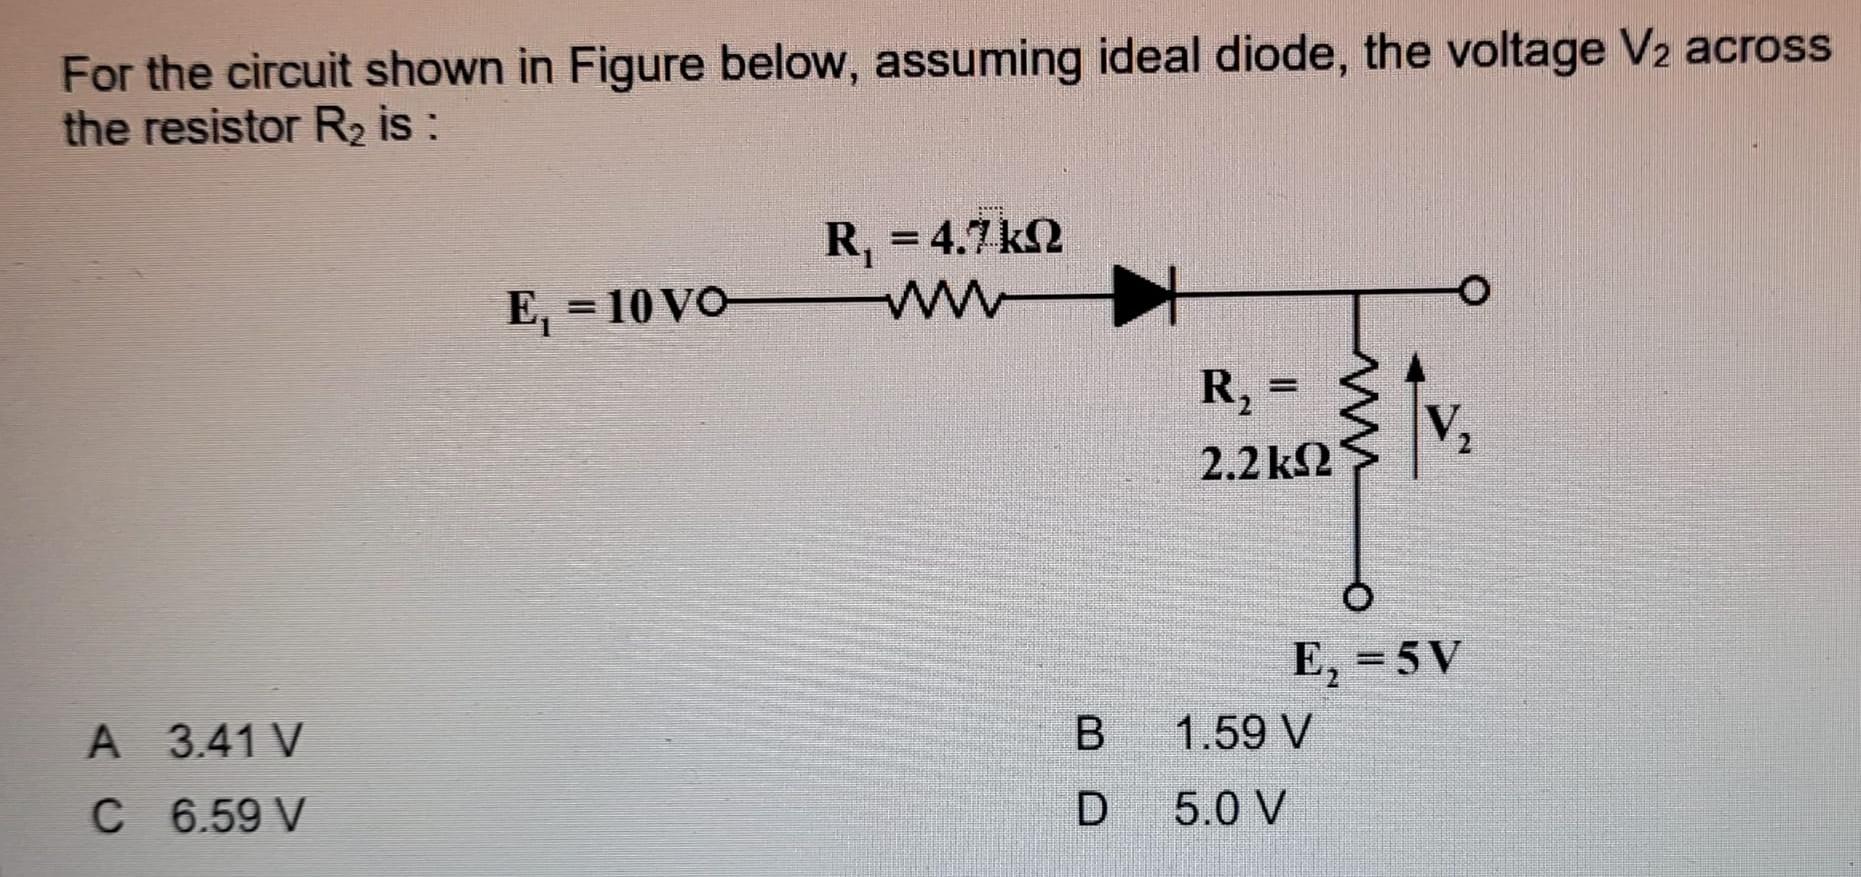 For the circuit shown in Figure below, assuming ideal diode, the voltage V2 across the resistor R is : A 3.41